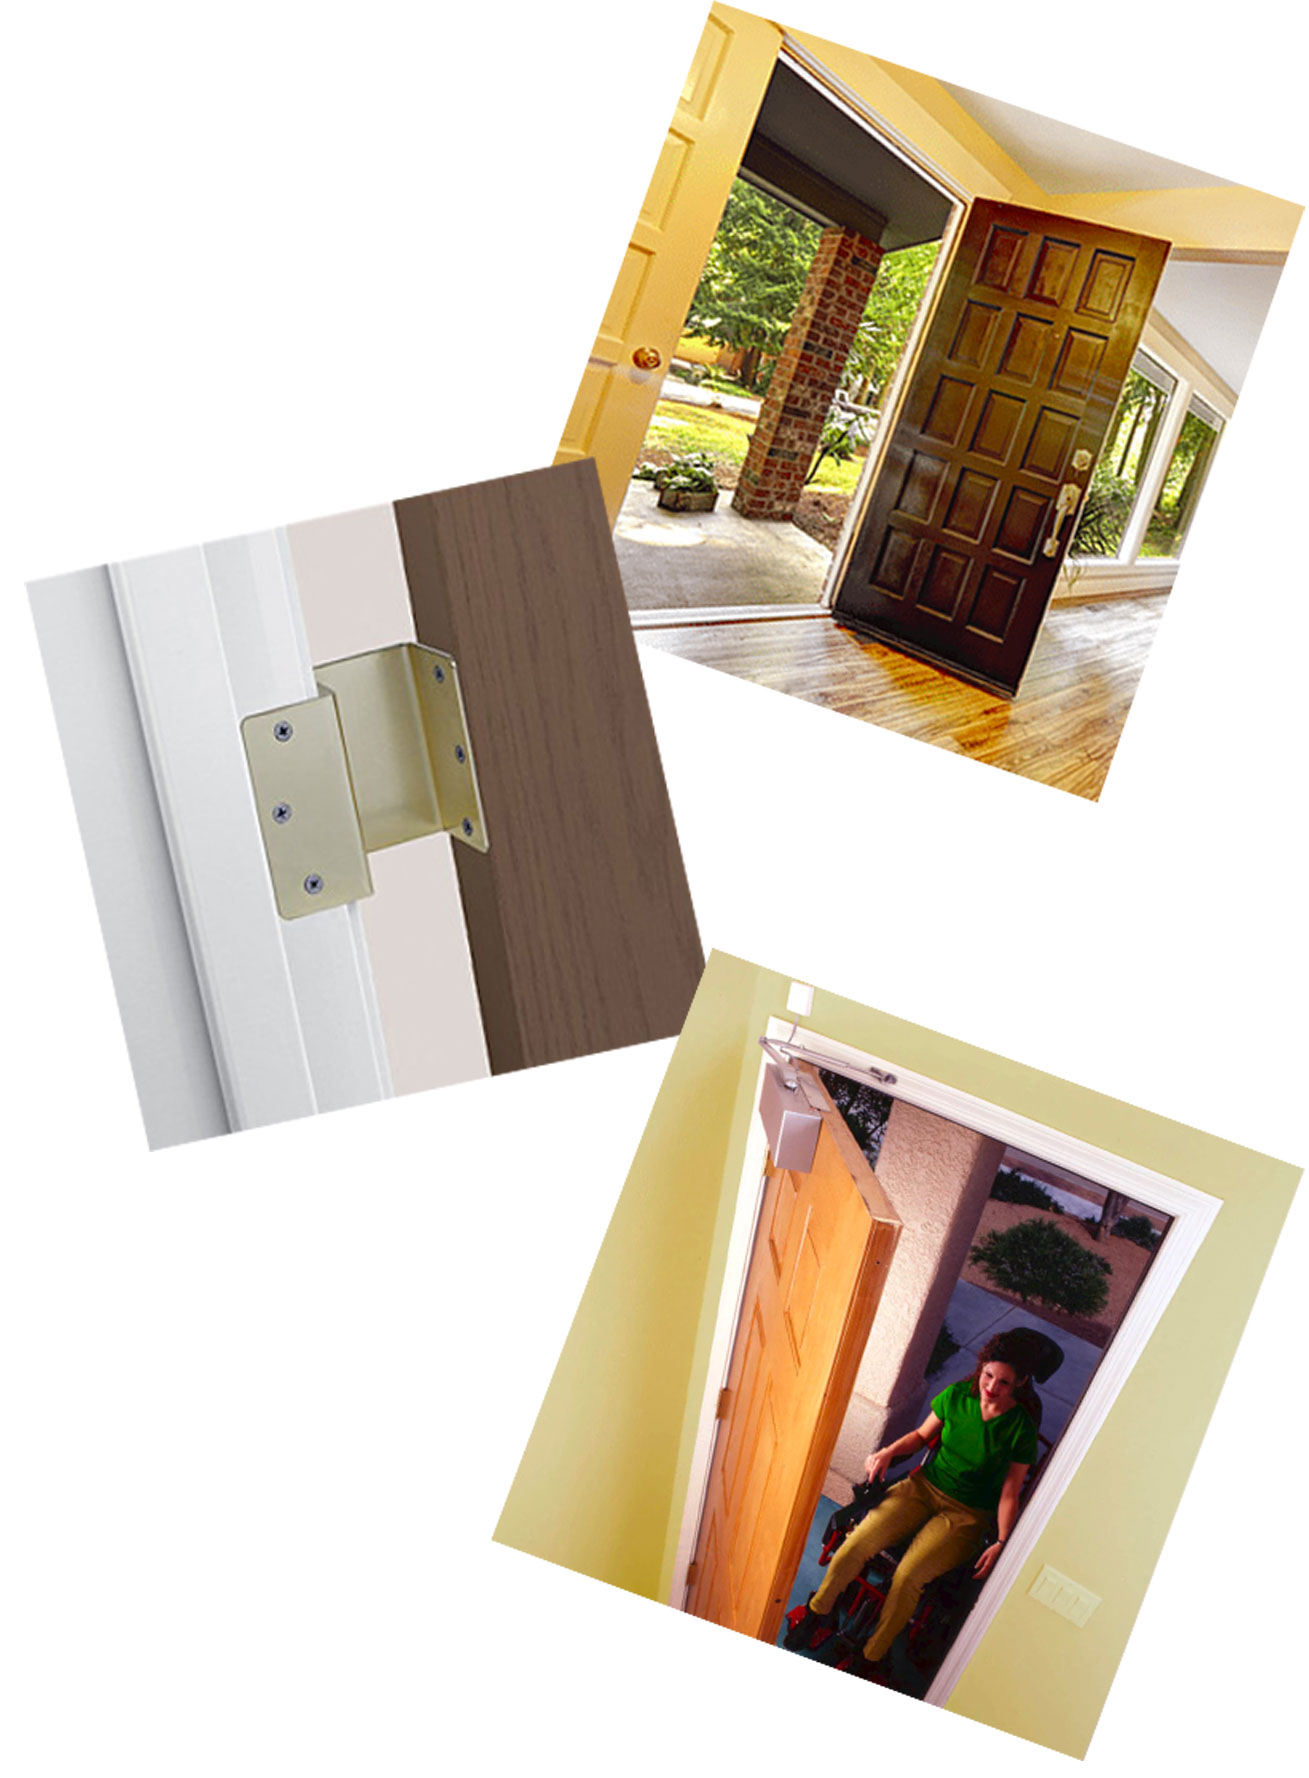 Coulee Region
                Mobility offers a range of option from door openers, to special
                hinges that widening your door without remodeling.